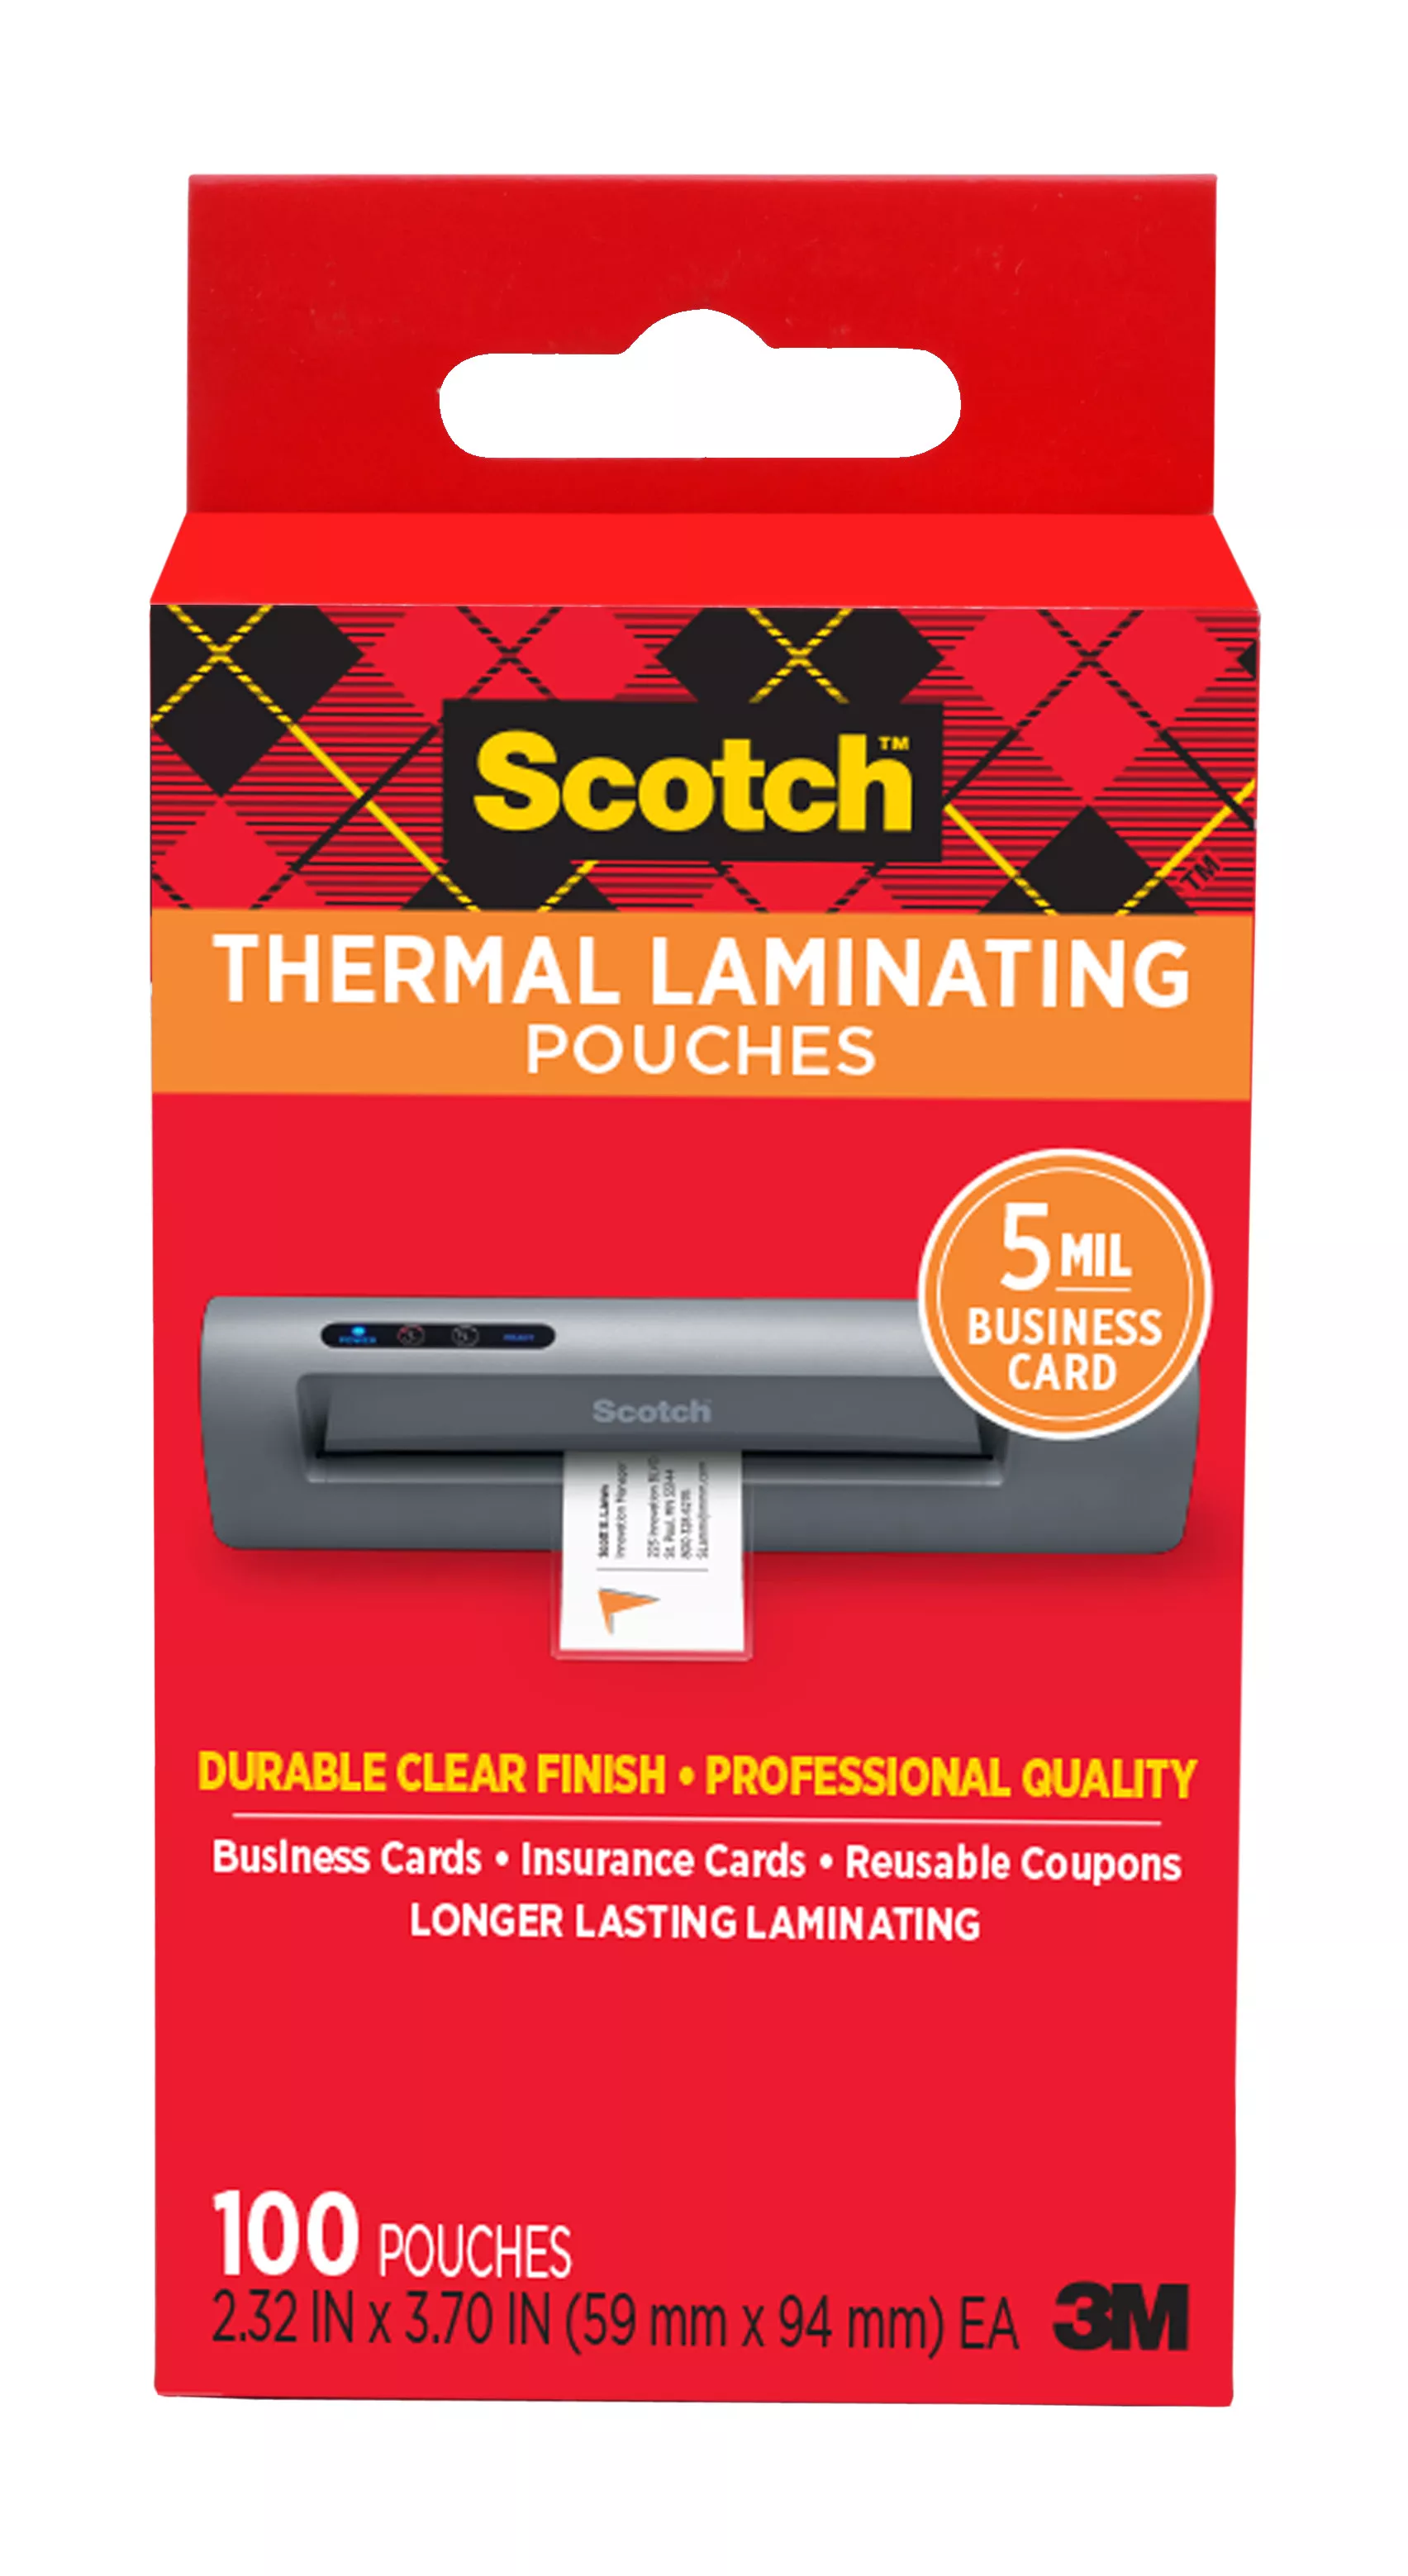 Scotch™ Thermal Pouches TP5851-100, 2.32 in x 3.70 in (59 mm x 94 mm)
Business Card 100 pack